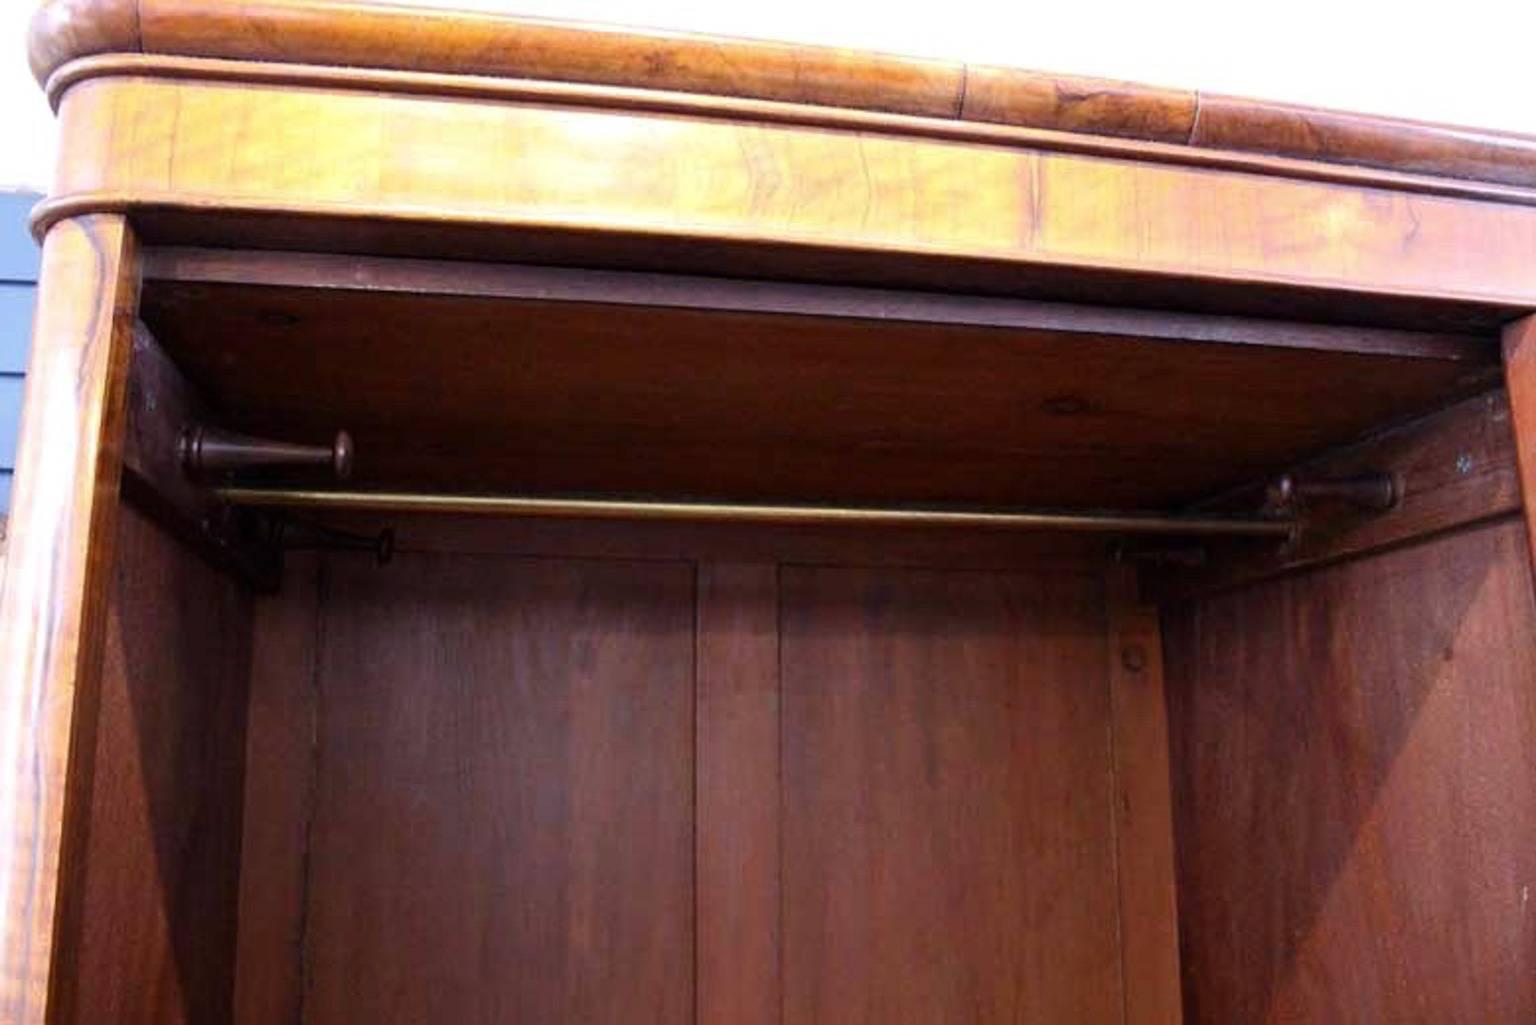 Handsome Victorian walnut wardrobe of good proportions. Attractive cornice above an arched centre panelled door.
Enclosed hanging rail and four original hanging pegs above a large single drawer with pretty turned knobs for handy storage.
In good